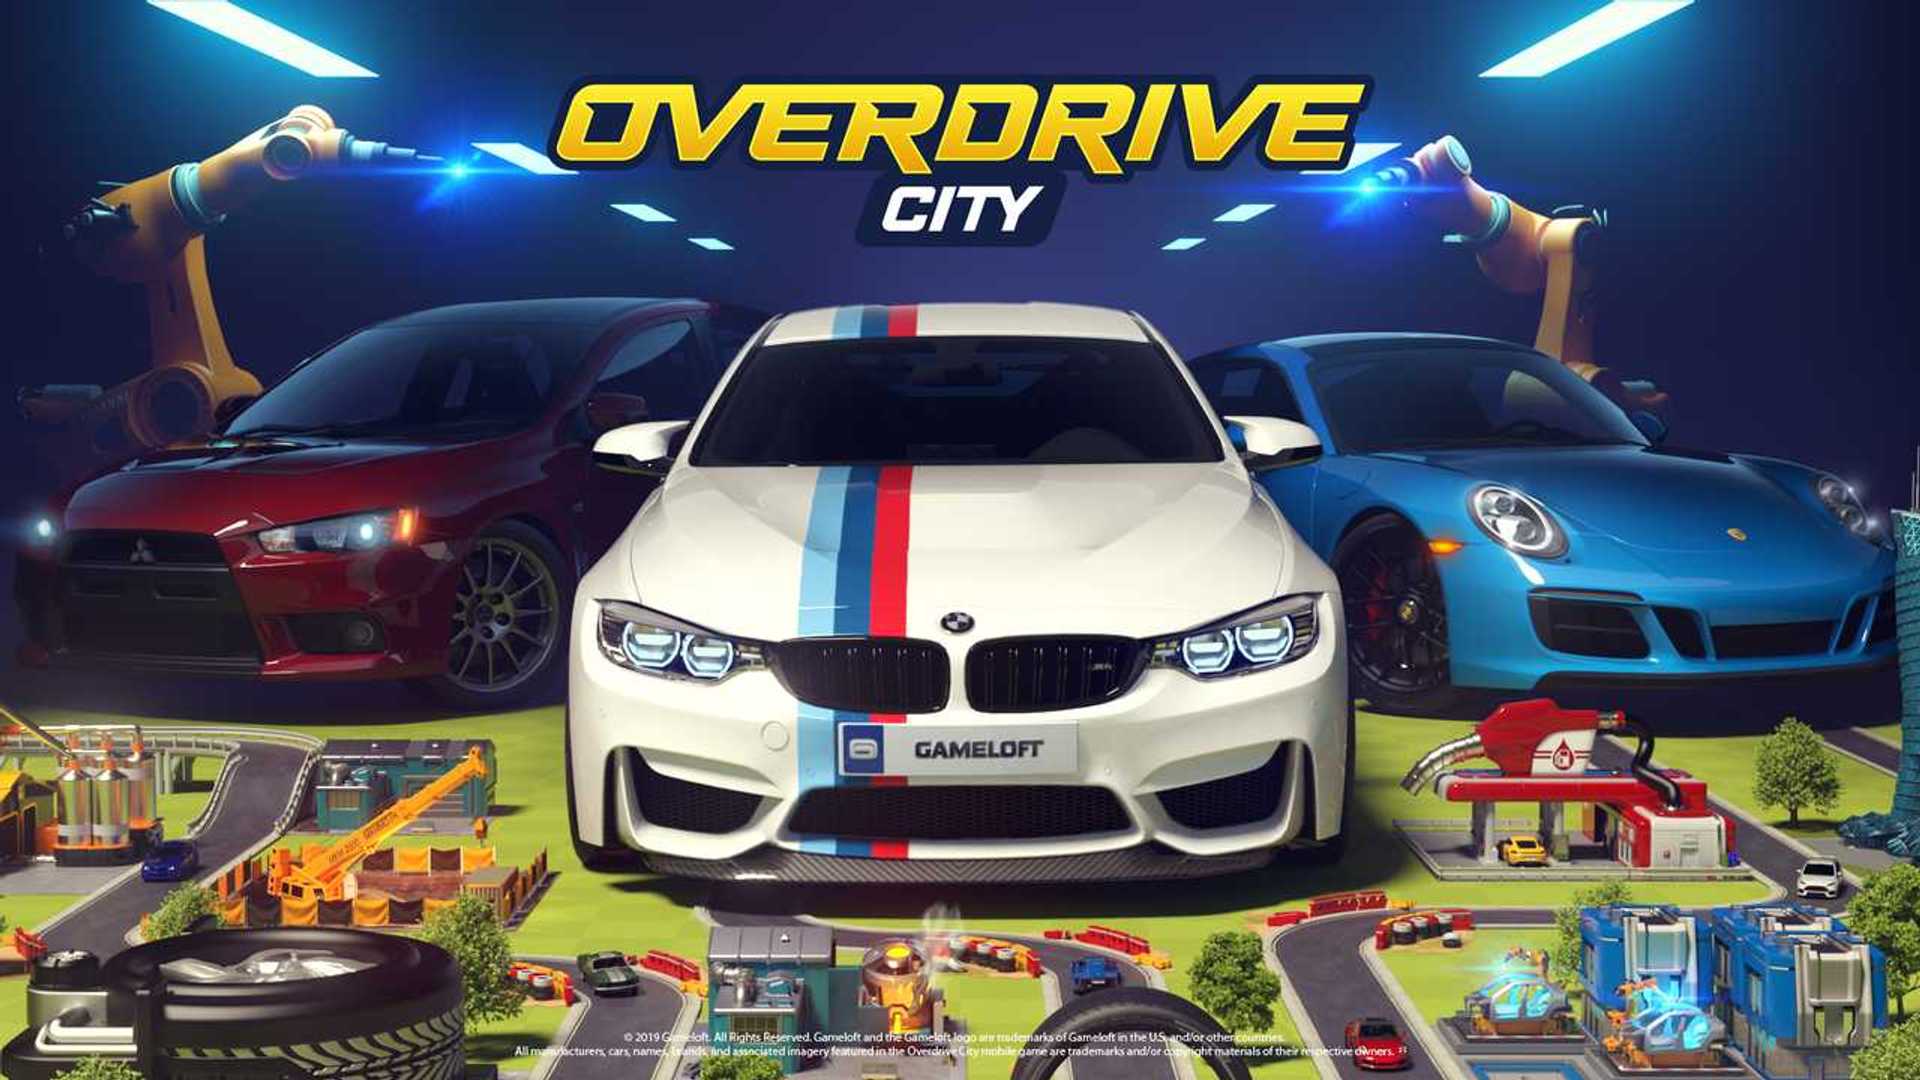 "Overdrive City" Is A New Mobile Game for Car Nerds